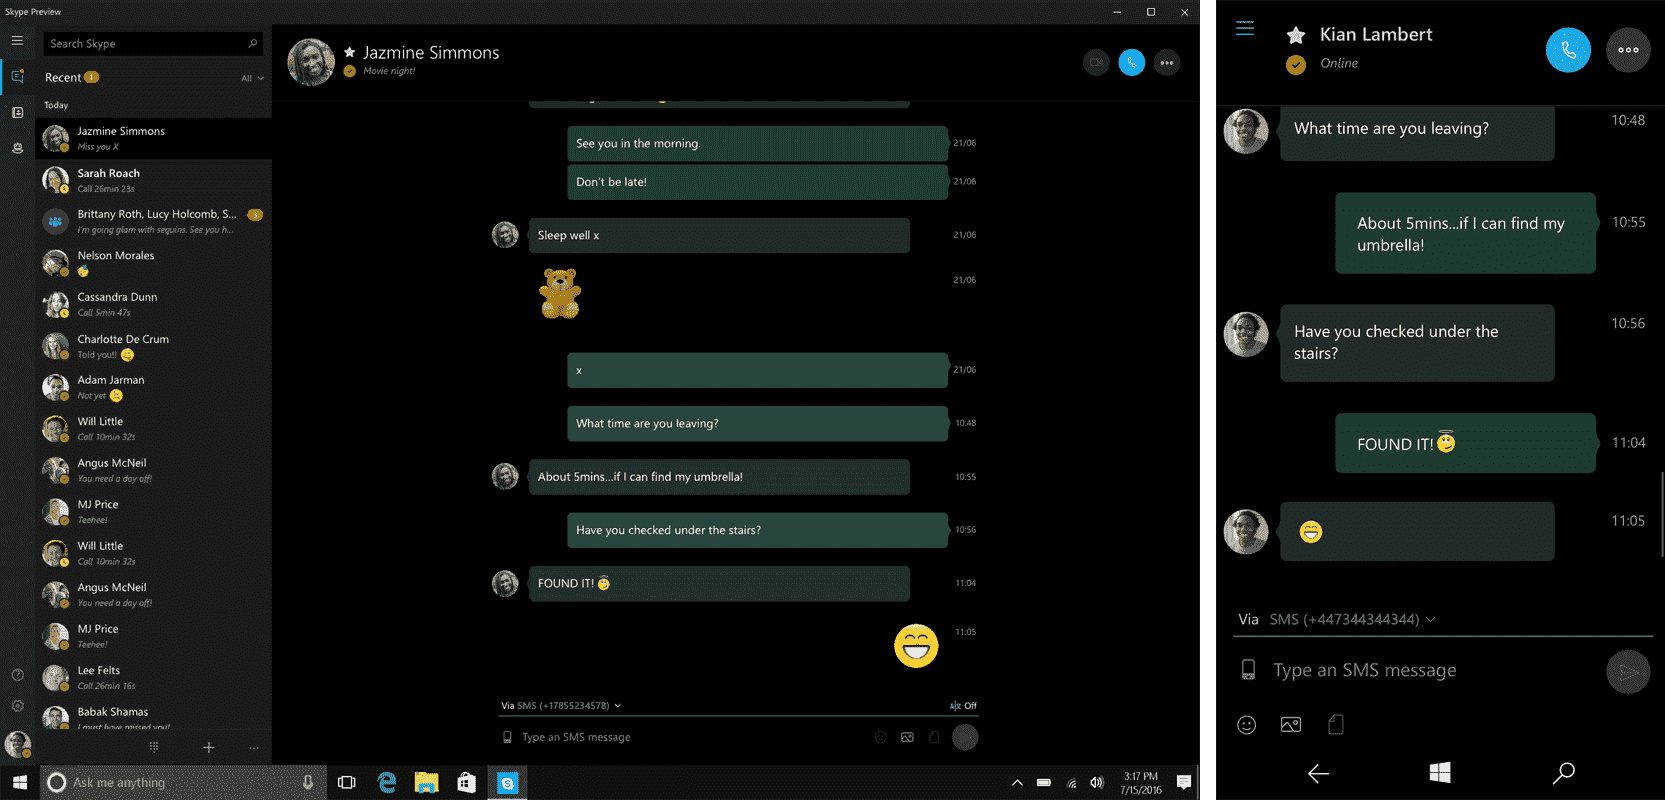 Microsoft’s latest update for Skype brings phone SMS conversation to Windows 10 Untitled-2-grouped.png